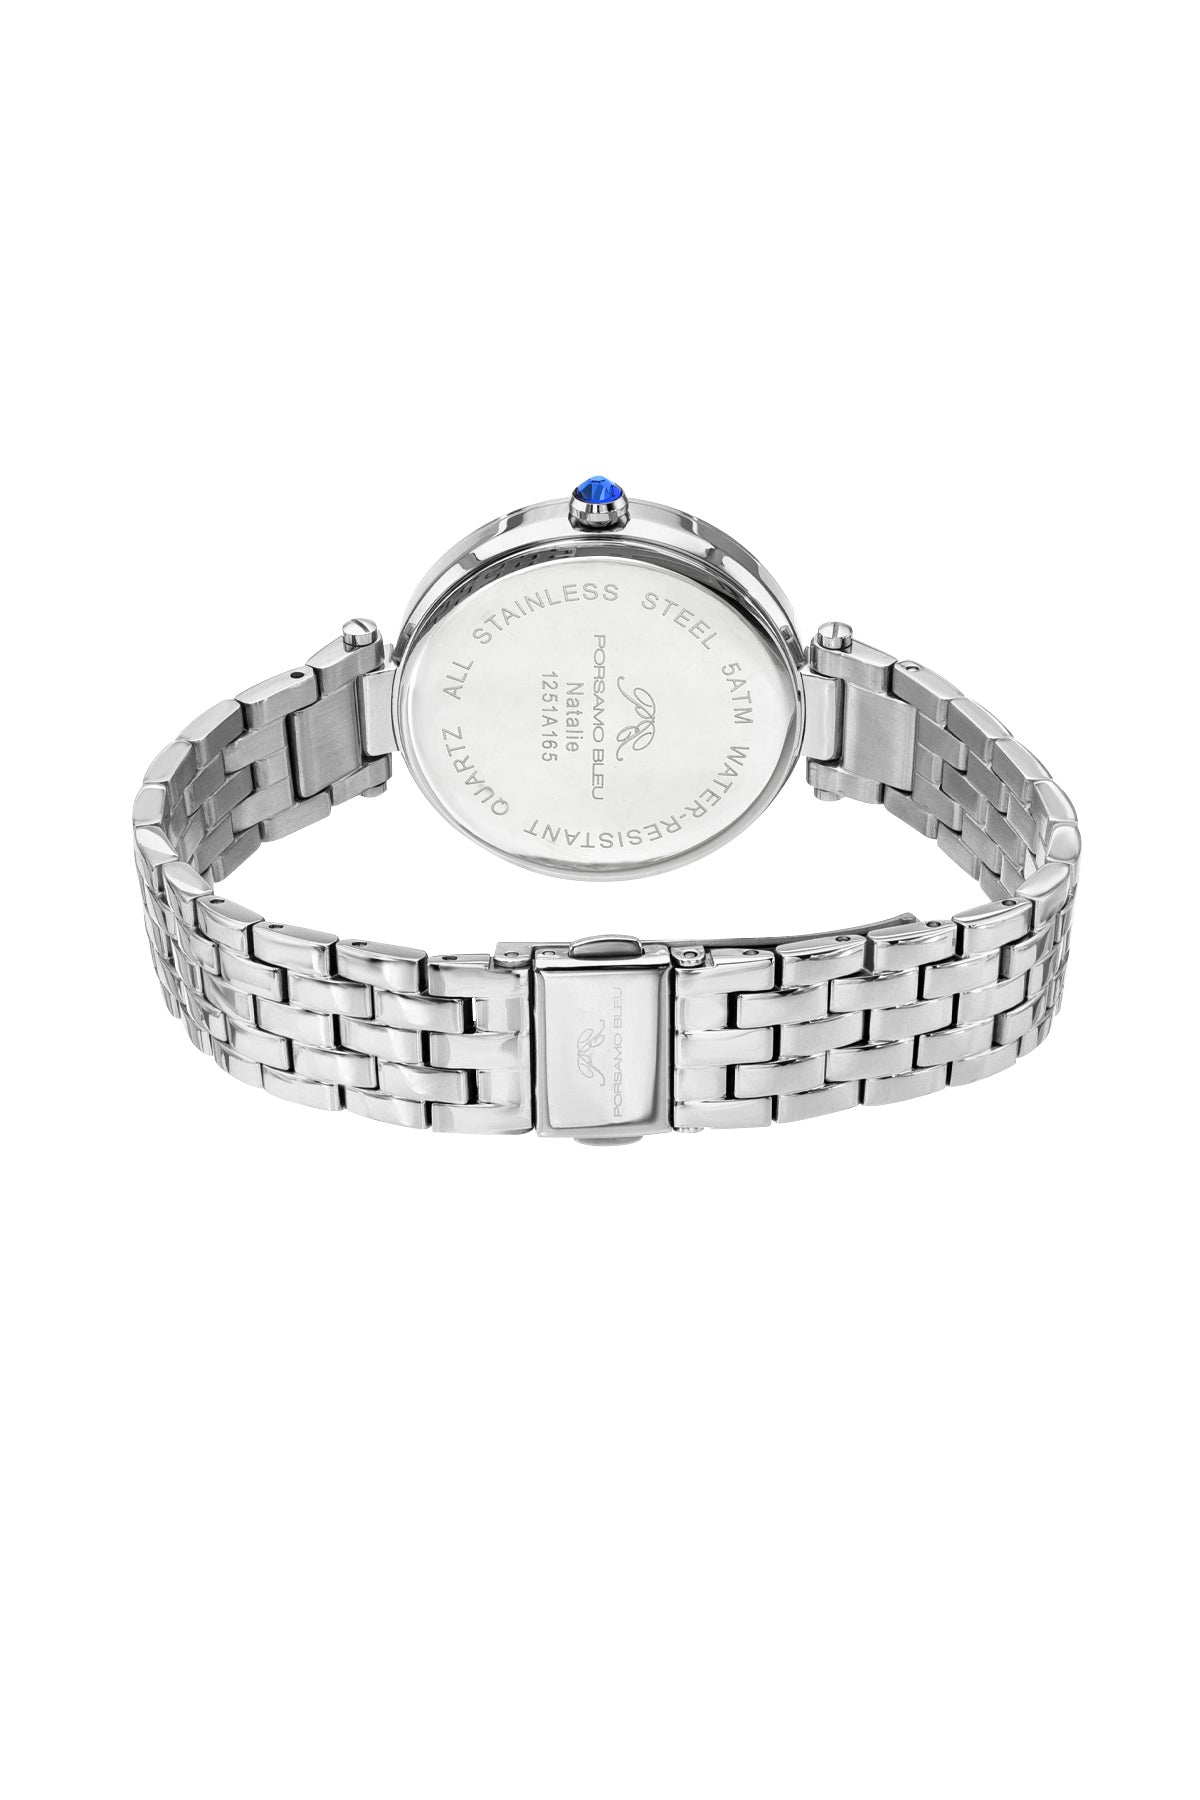 Porsamo Bleu Natalie Luxury Women's Stainless Steel Watch, With White Guilloche Dial, Silver, 1251ANAS